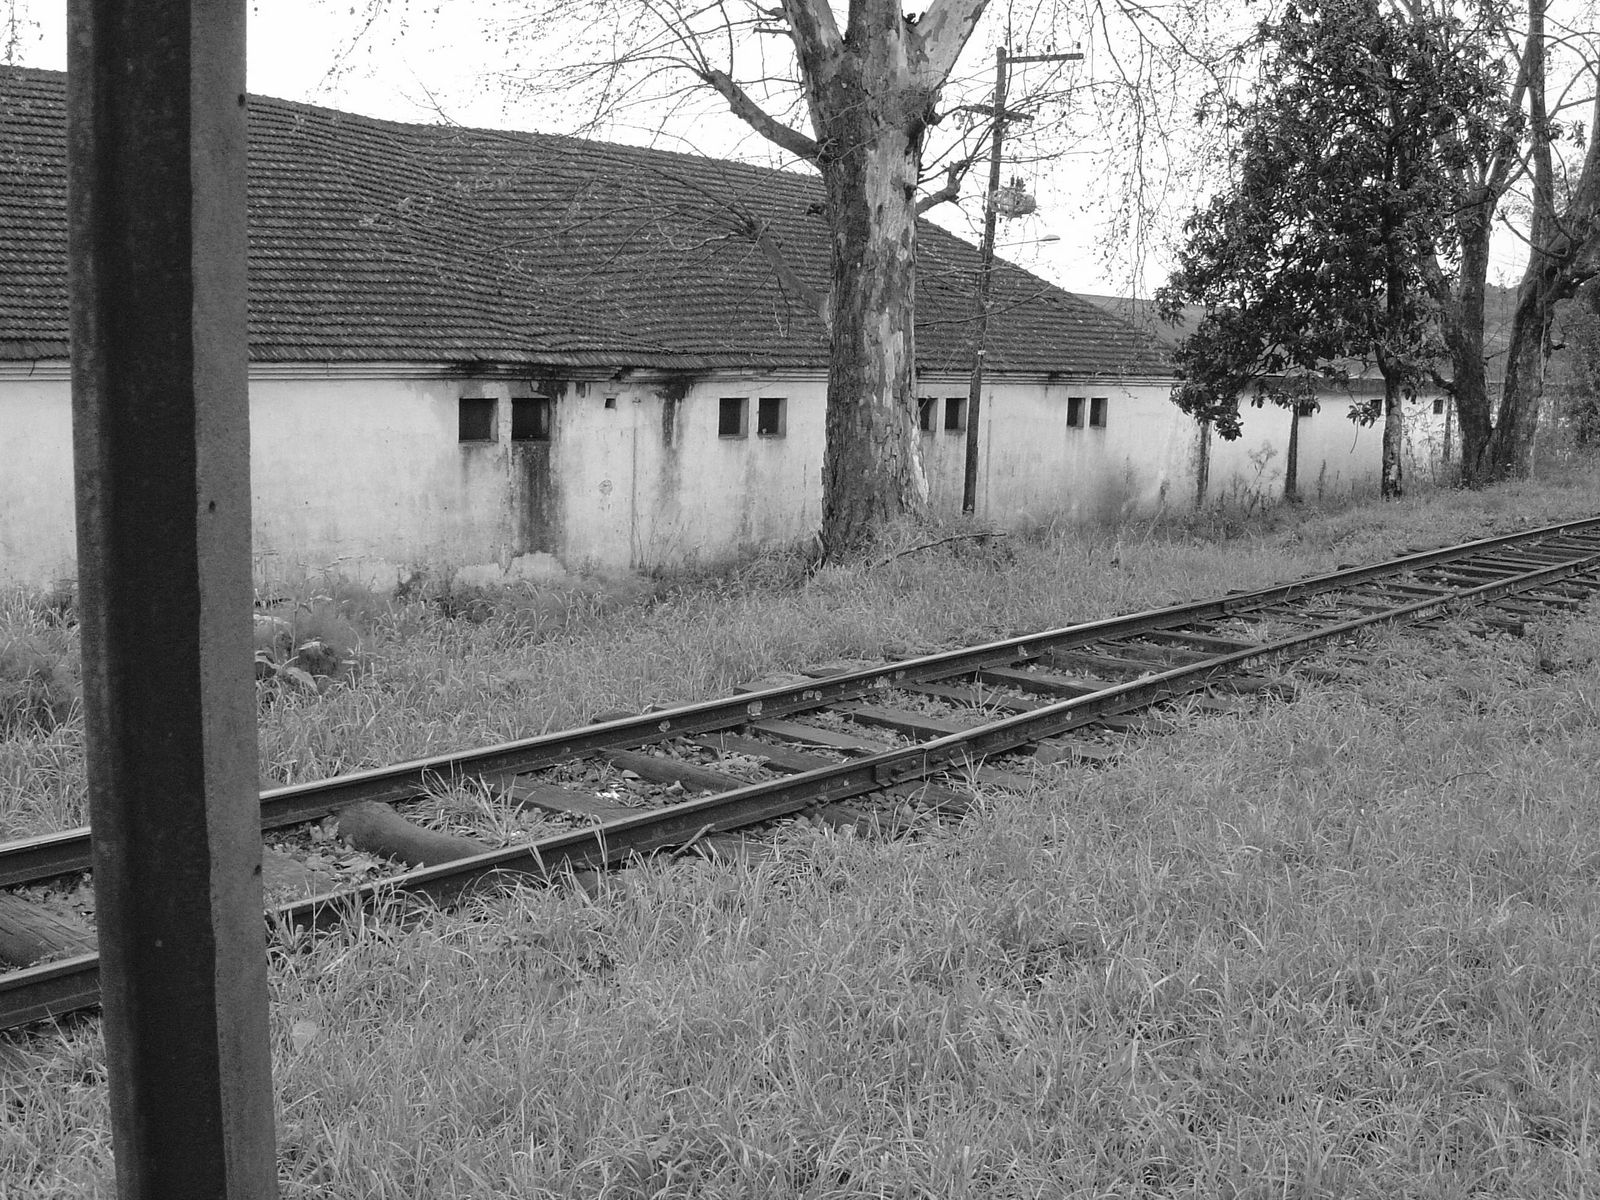 a black and white image of the back side of a house